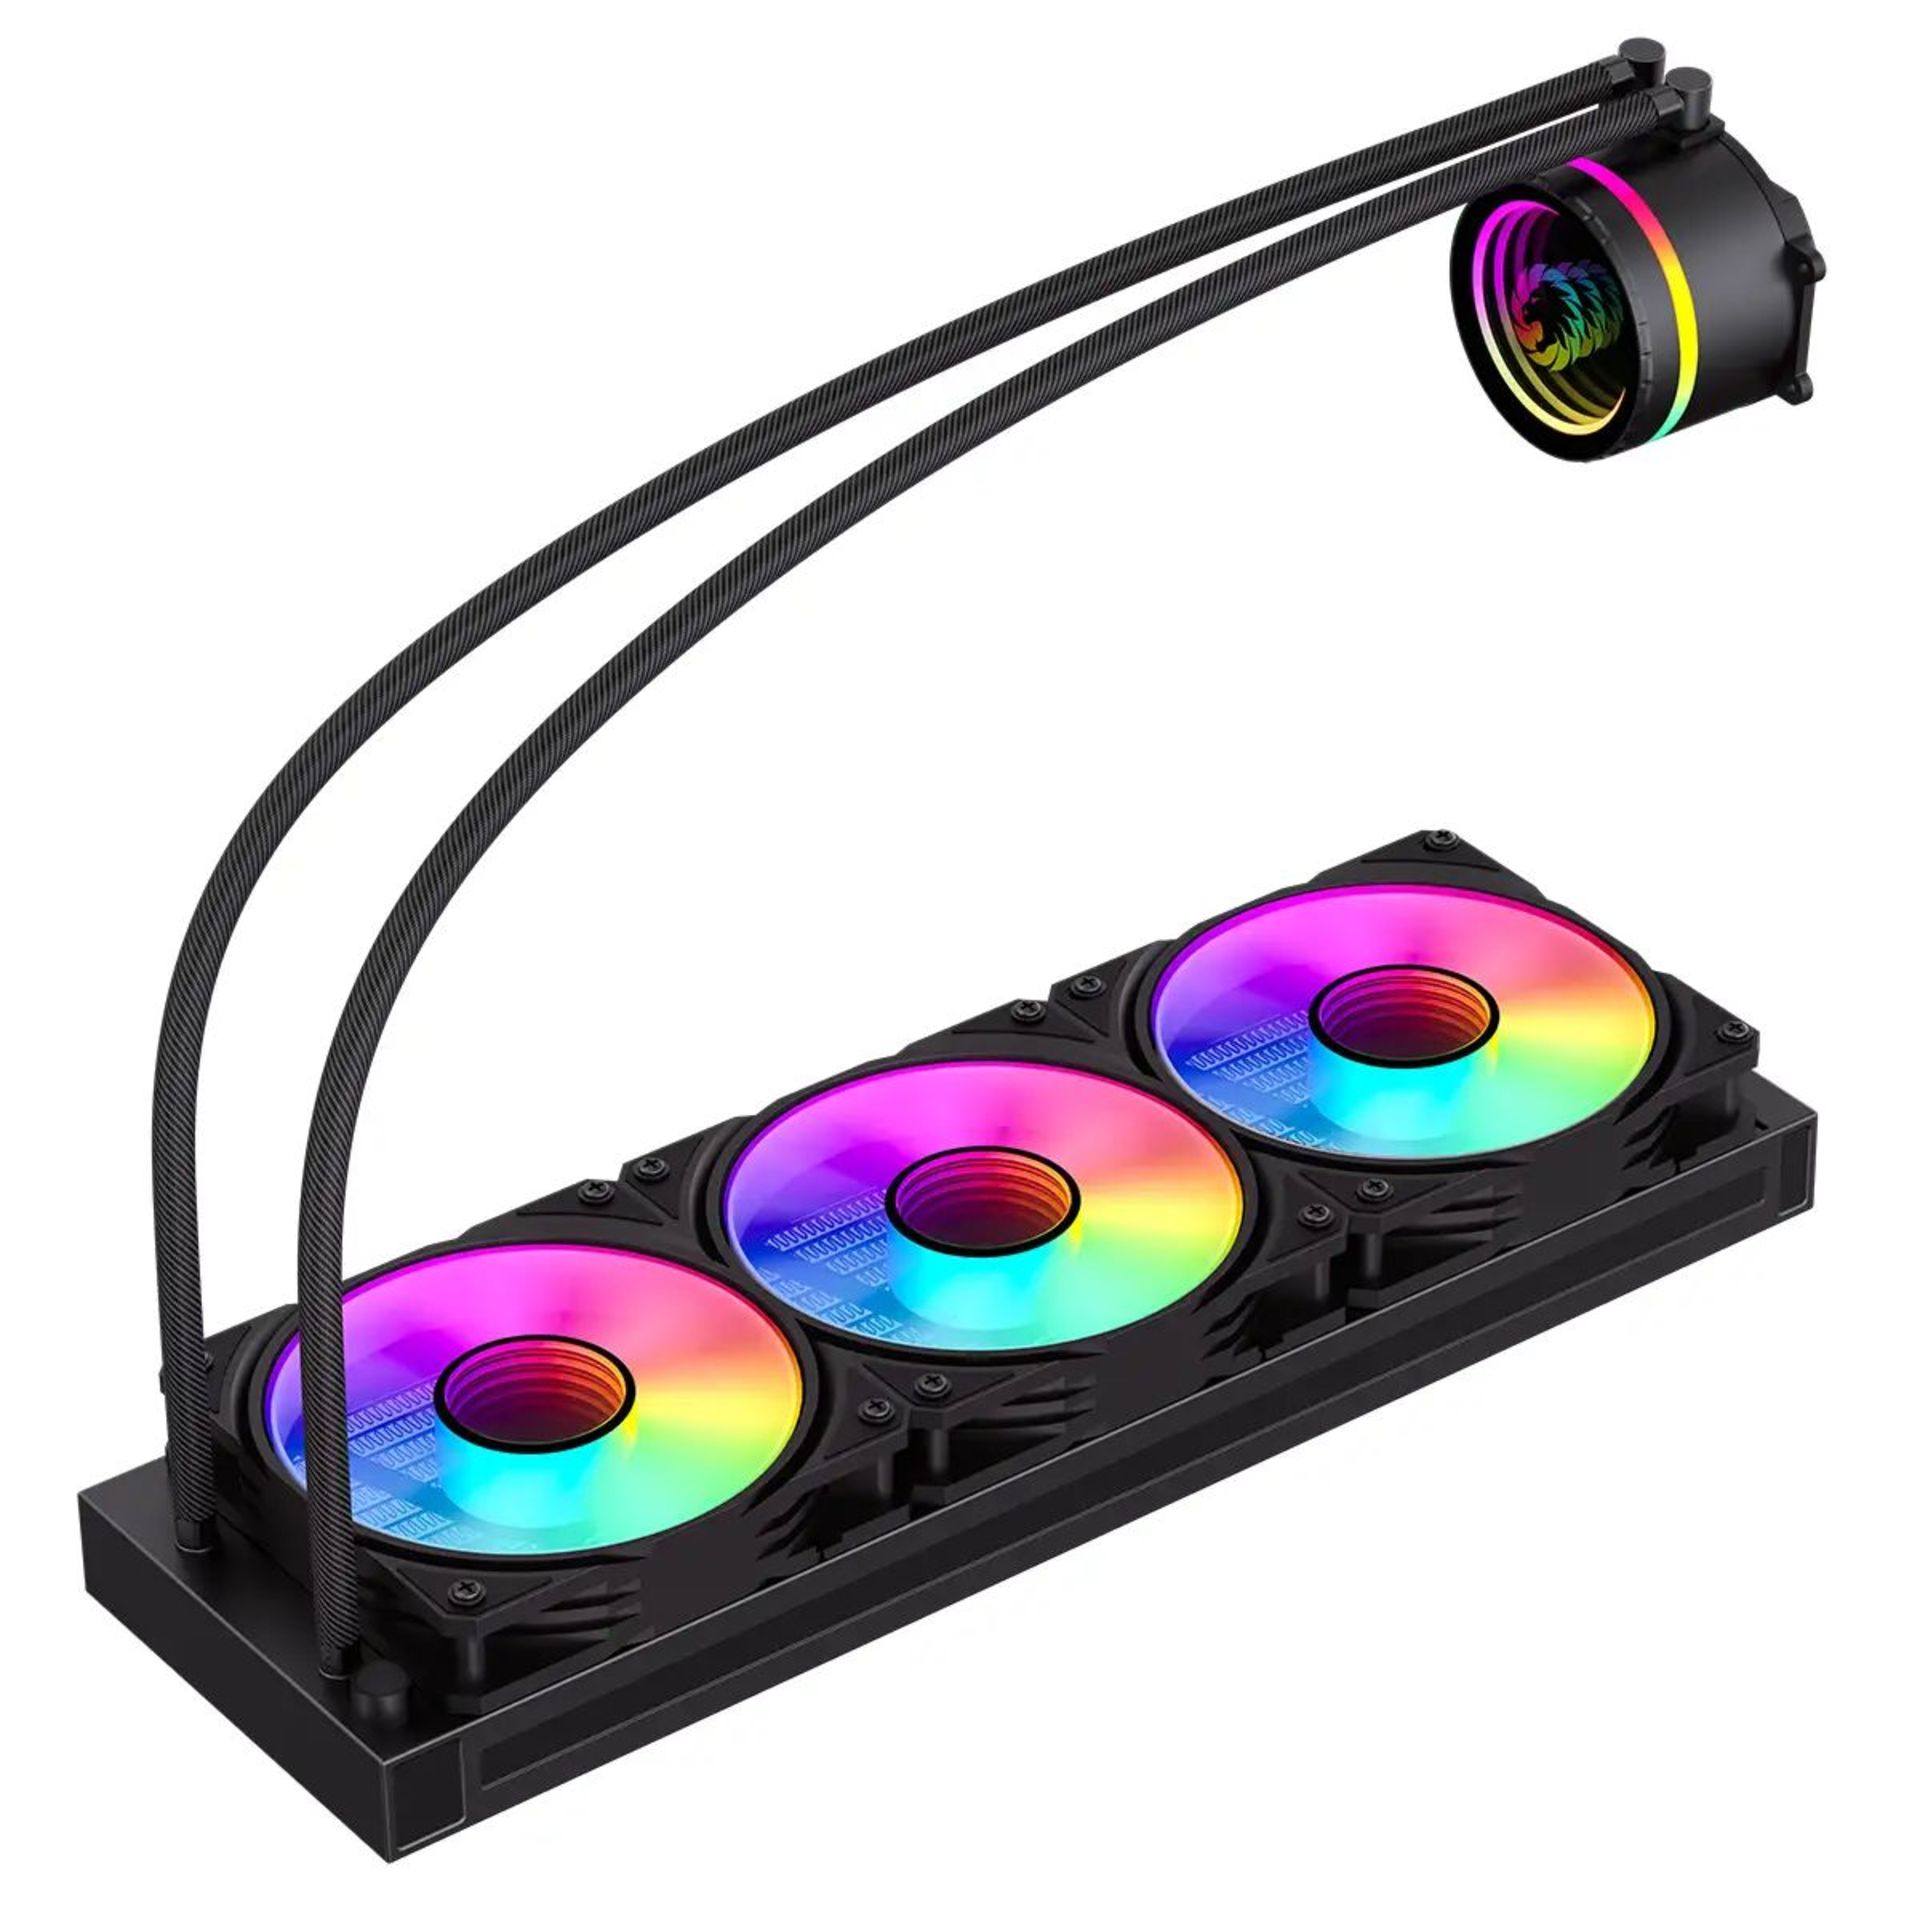 BRAND NEW FACTORY SEALED GAMEMAX Iceburg 360mm ARGB All-in-One Liquid Cooler. RRP £79.99. GameMax - Image 3 of 7